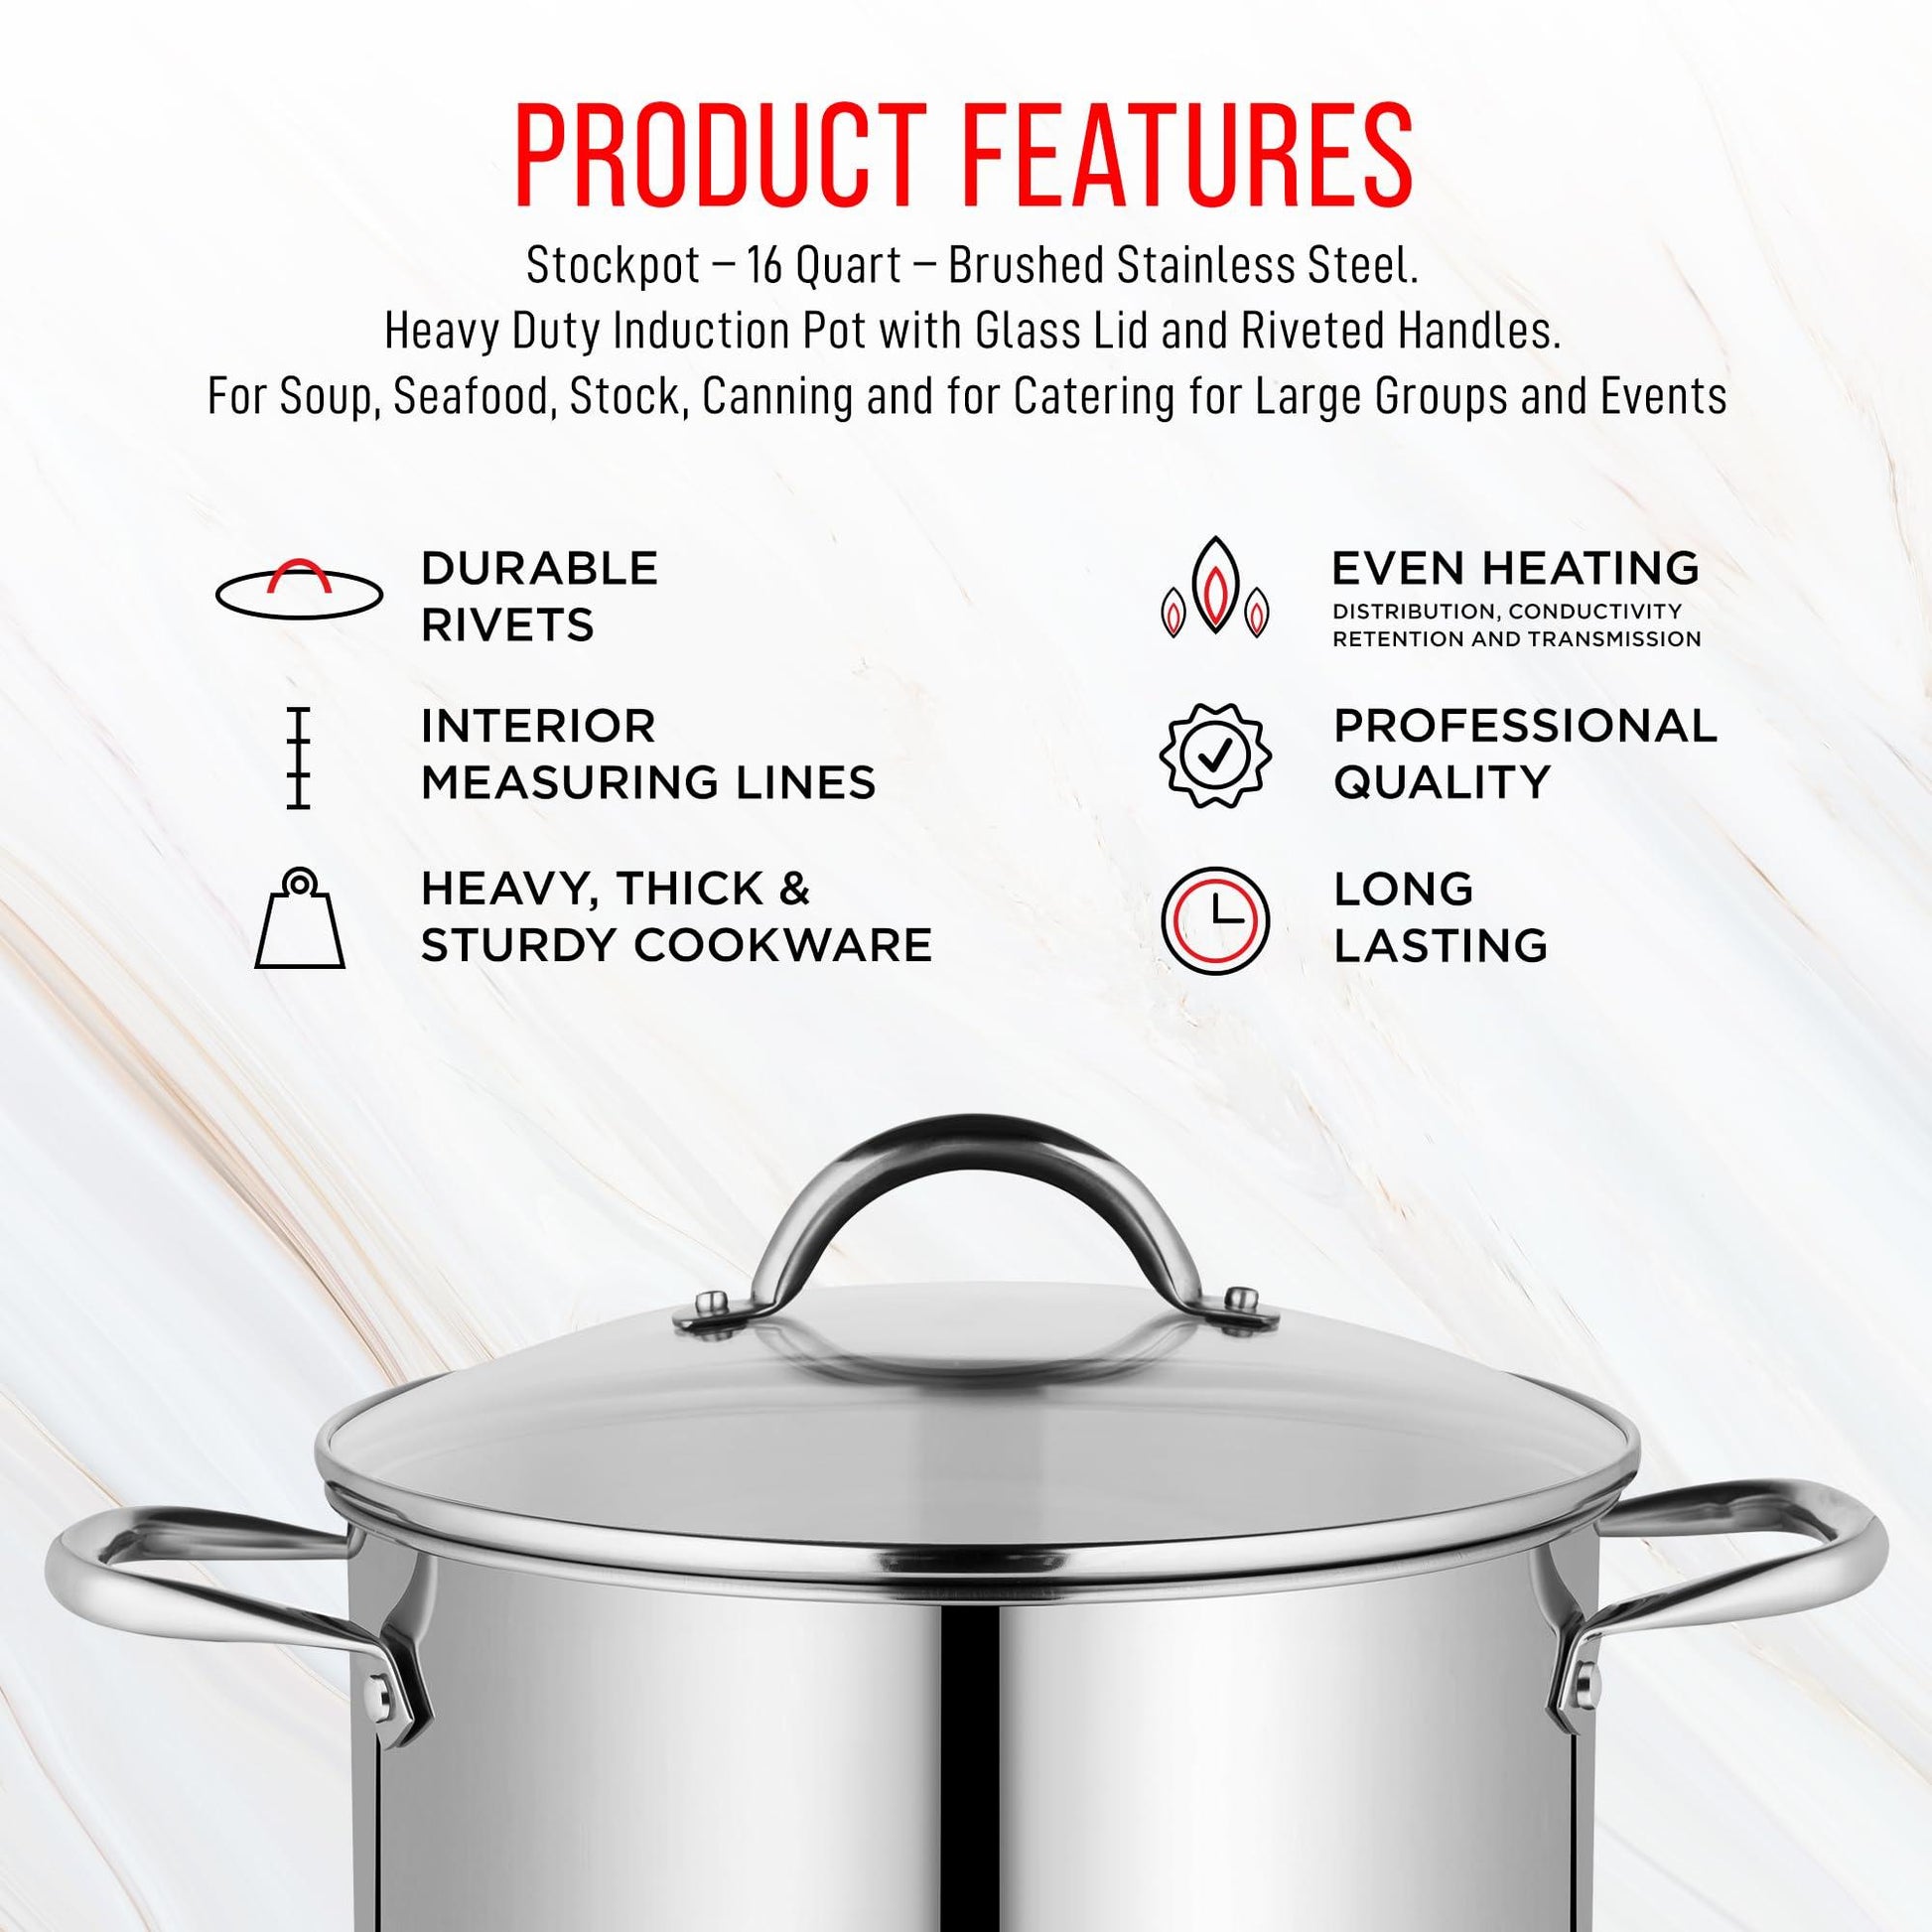 Bakken-Swiss Deluxe 16-Quart Stainless Steel Stockpot w/Tempered Glass See-Through Lid - Simmering Delicious Soups Stews & Induction Cooking - Exceptional Heat Distribution - Heavy-Duty & Food-Grade - CookCave